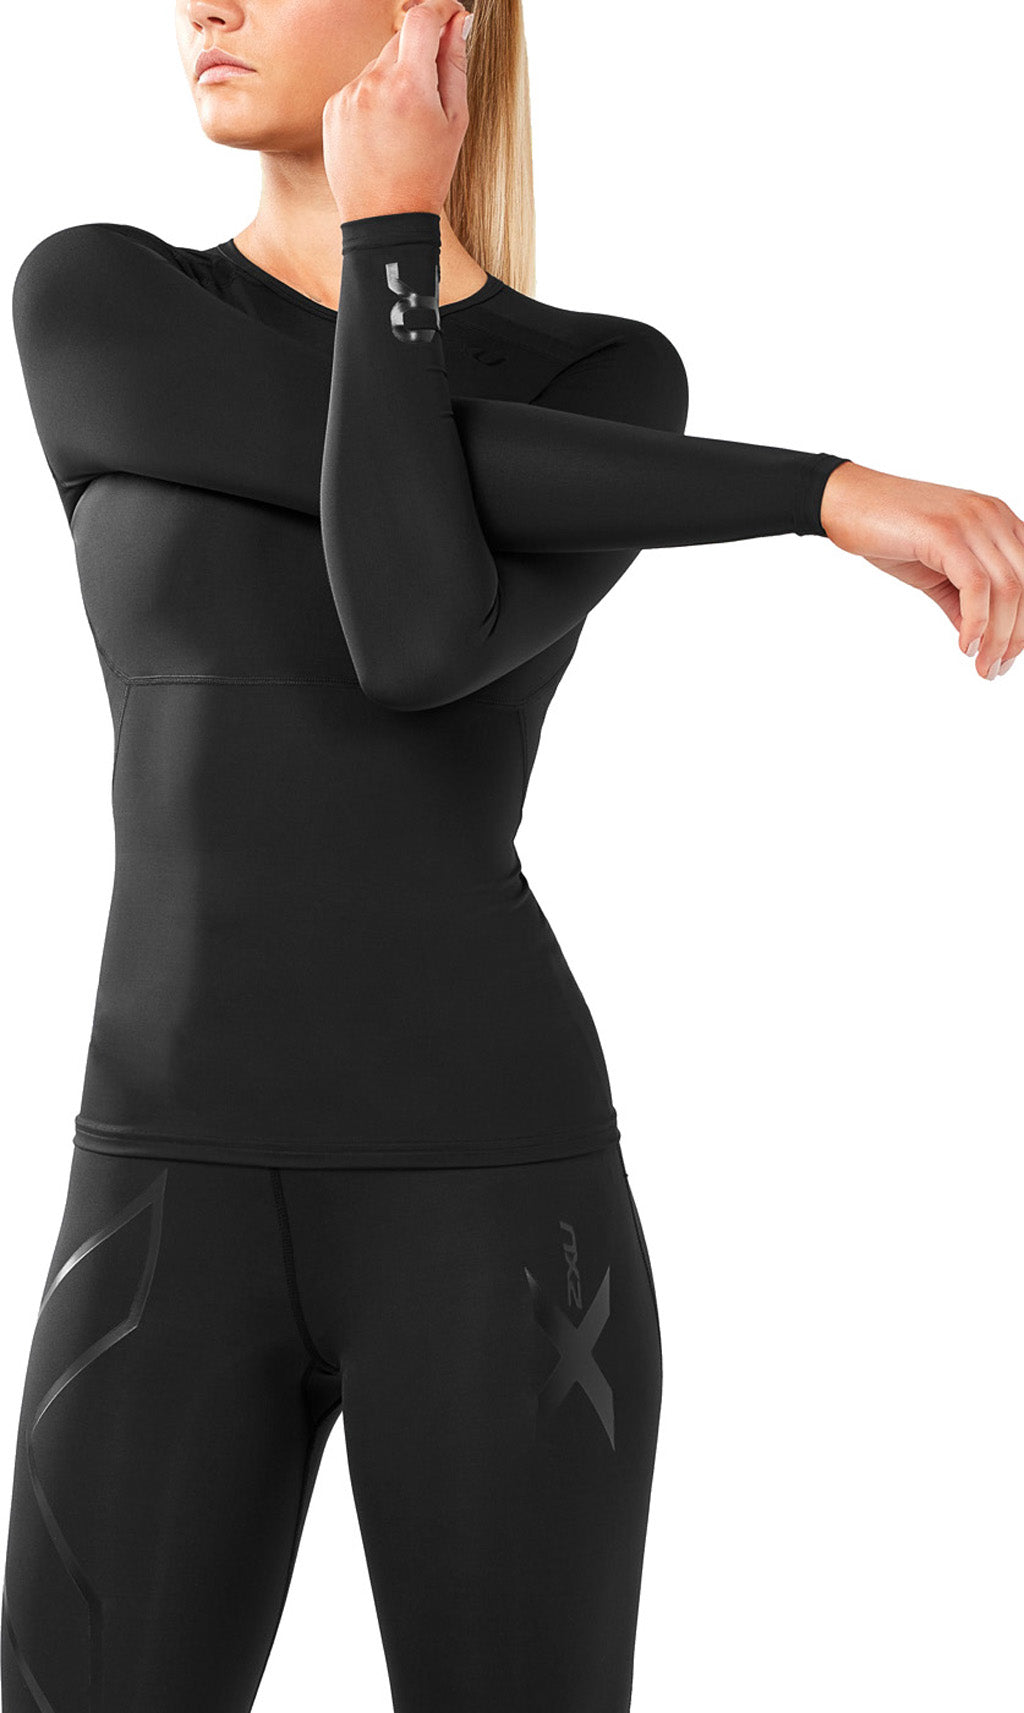 nuance Utroskab samvittighed 2XU Refresh Recovery Long Sleeve Compression Top - Women's | The Last Hunt